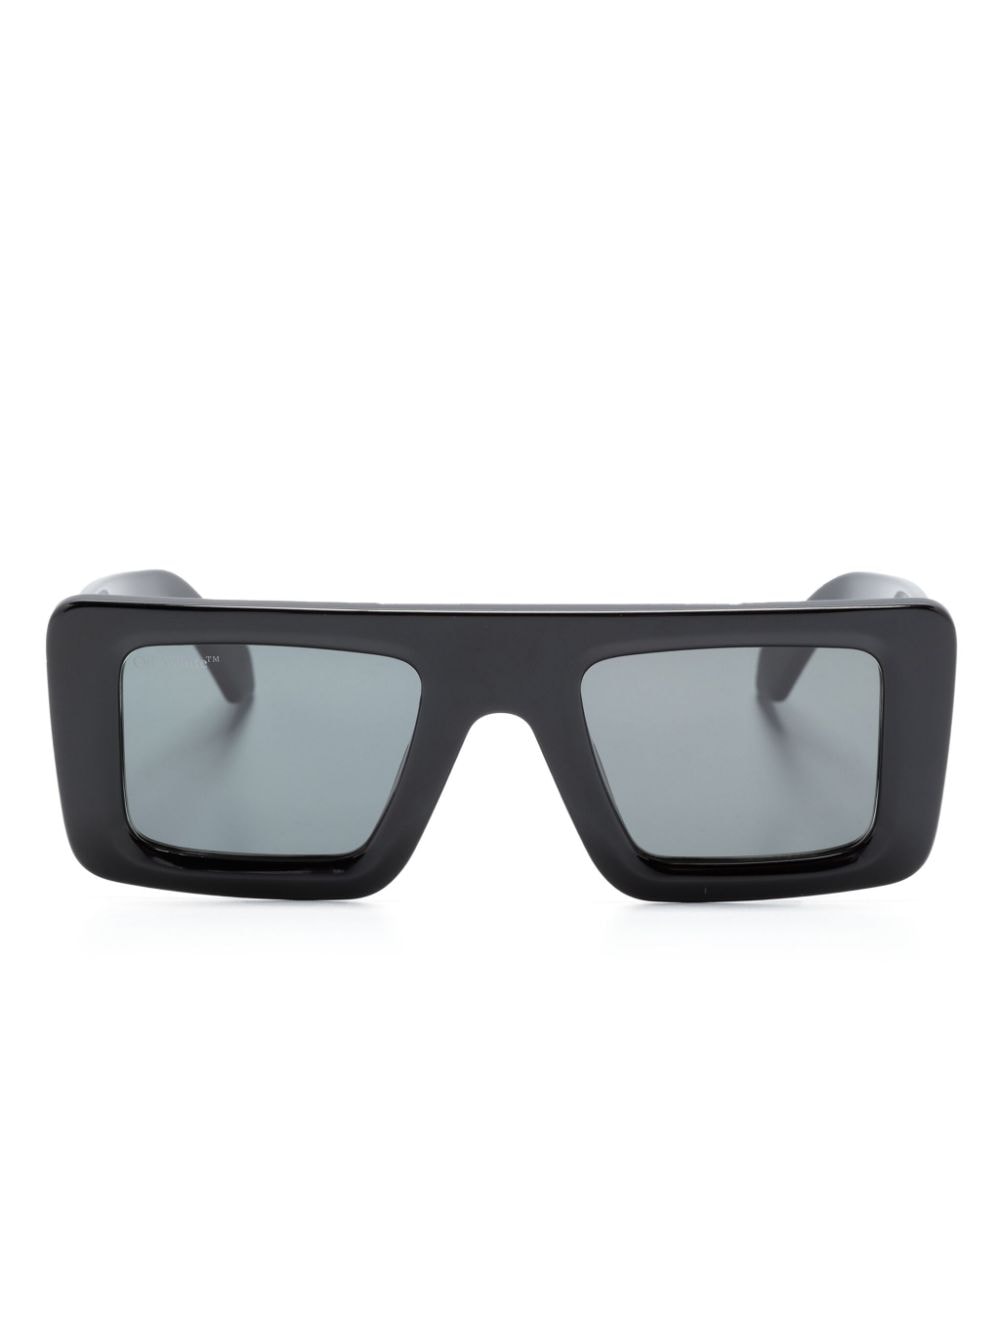 Off-White - Francisco Square-Frame Tinted Sunglasses - Green